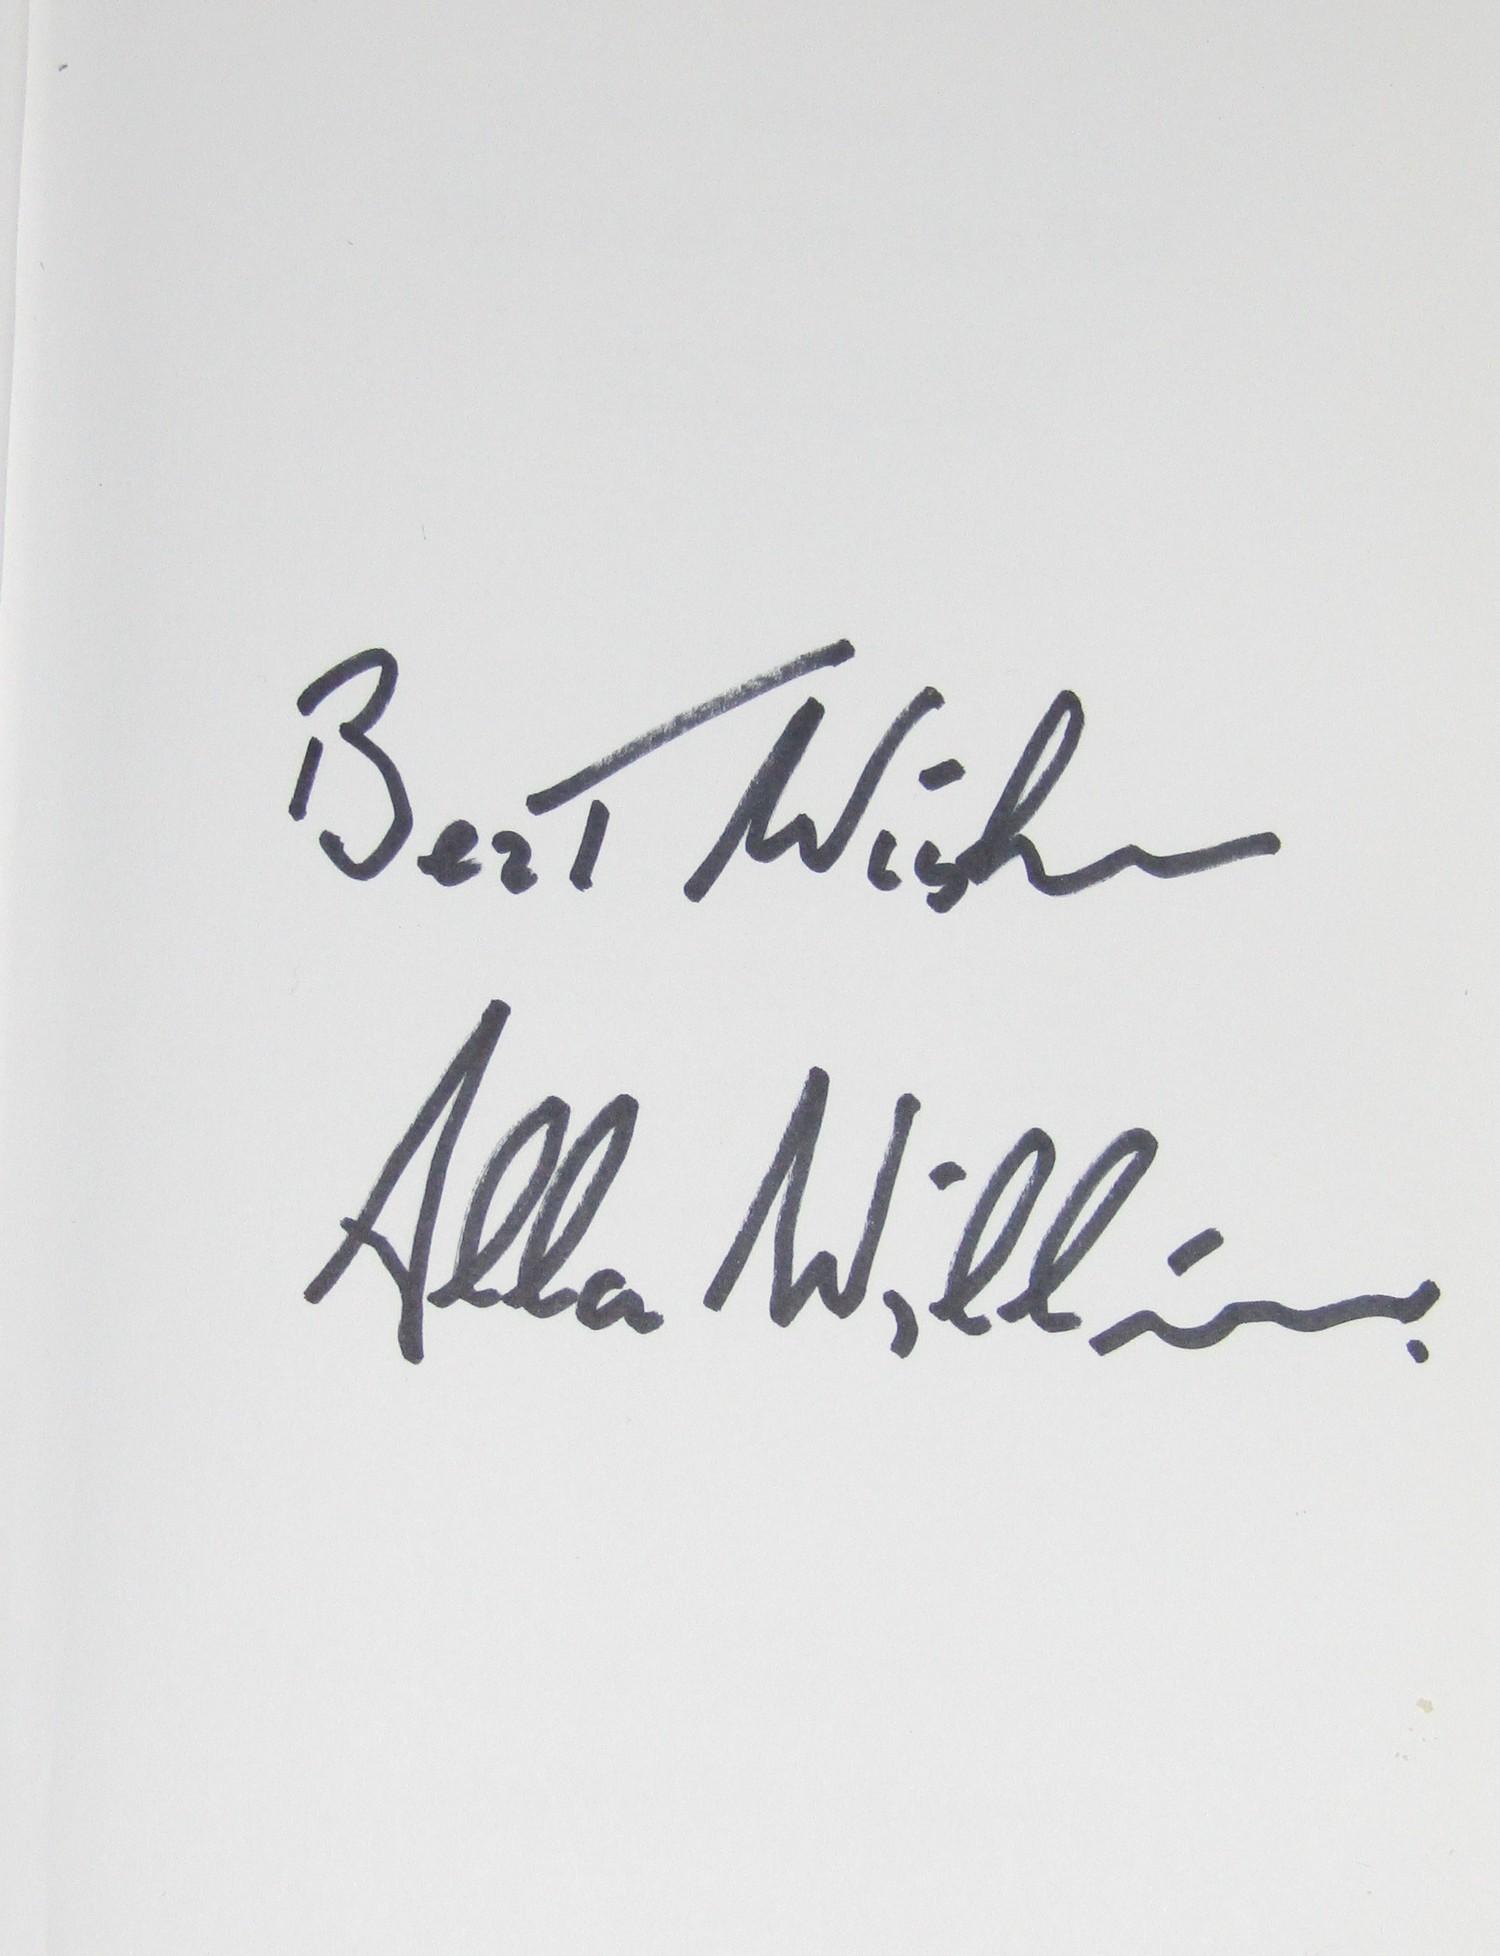 The Fool On The Hill book signed by Allan Williams - Image 2 of 2